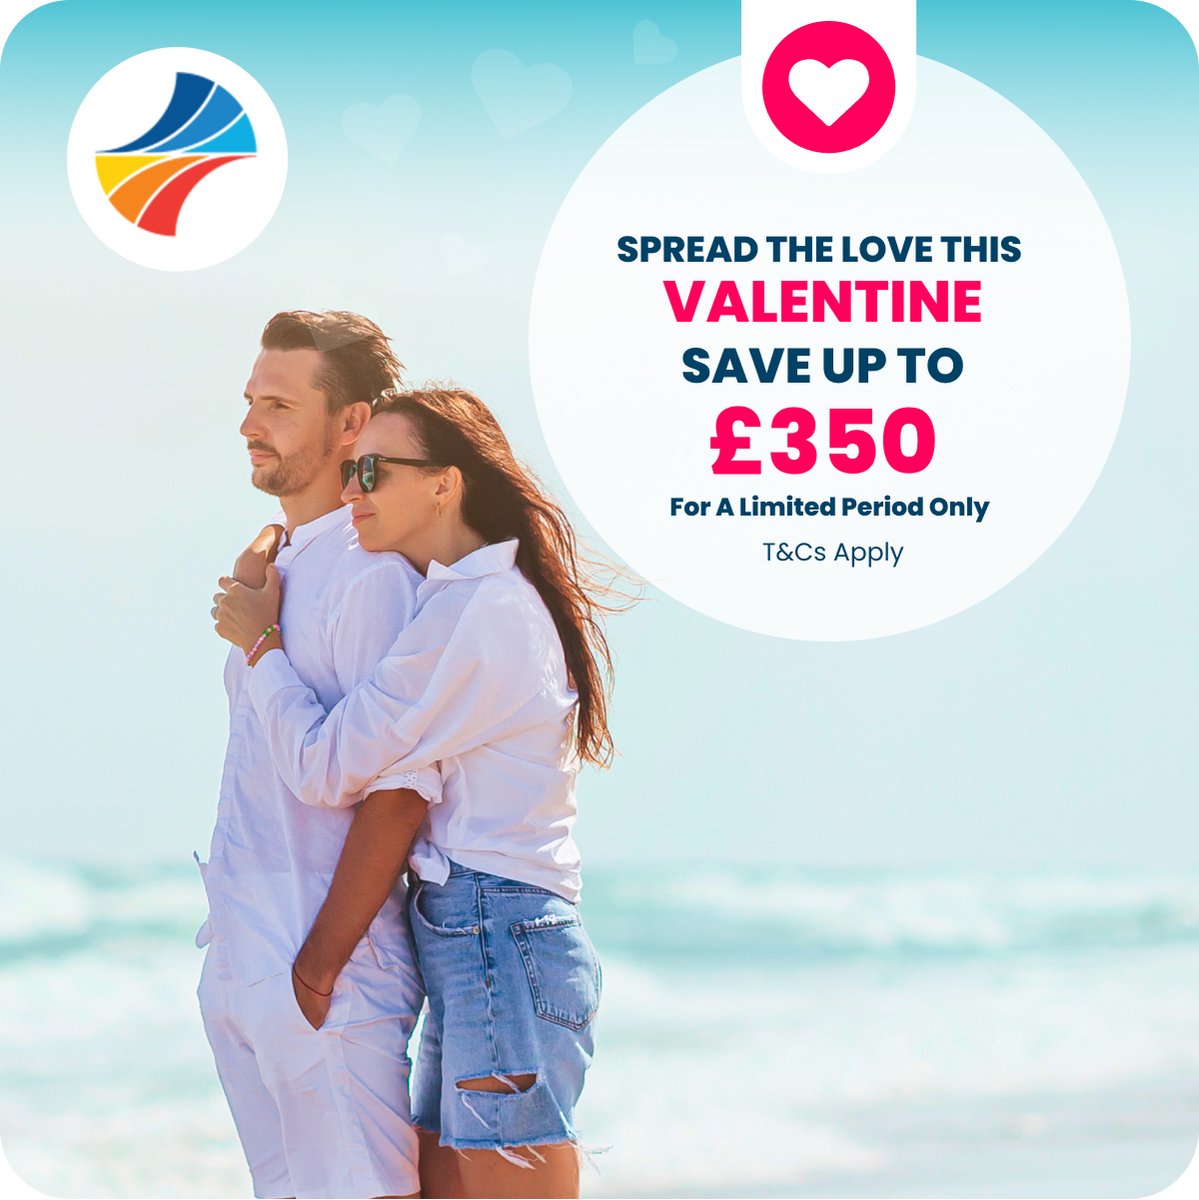 😍Spread the love this 💗Valentine's Day💗 and SAVE up to £350🥰 on your summer holiday to Bulgaria, Malta, Northern Cyprus, Croatia, Slovenia or Montenegro! 💘 🔥 Lock the price today with a deposit from £49! 💥BOOK NOW💥 bit.ly/48eRumI